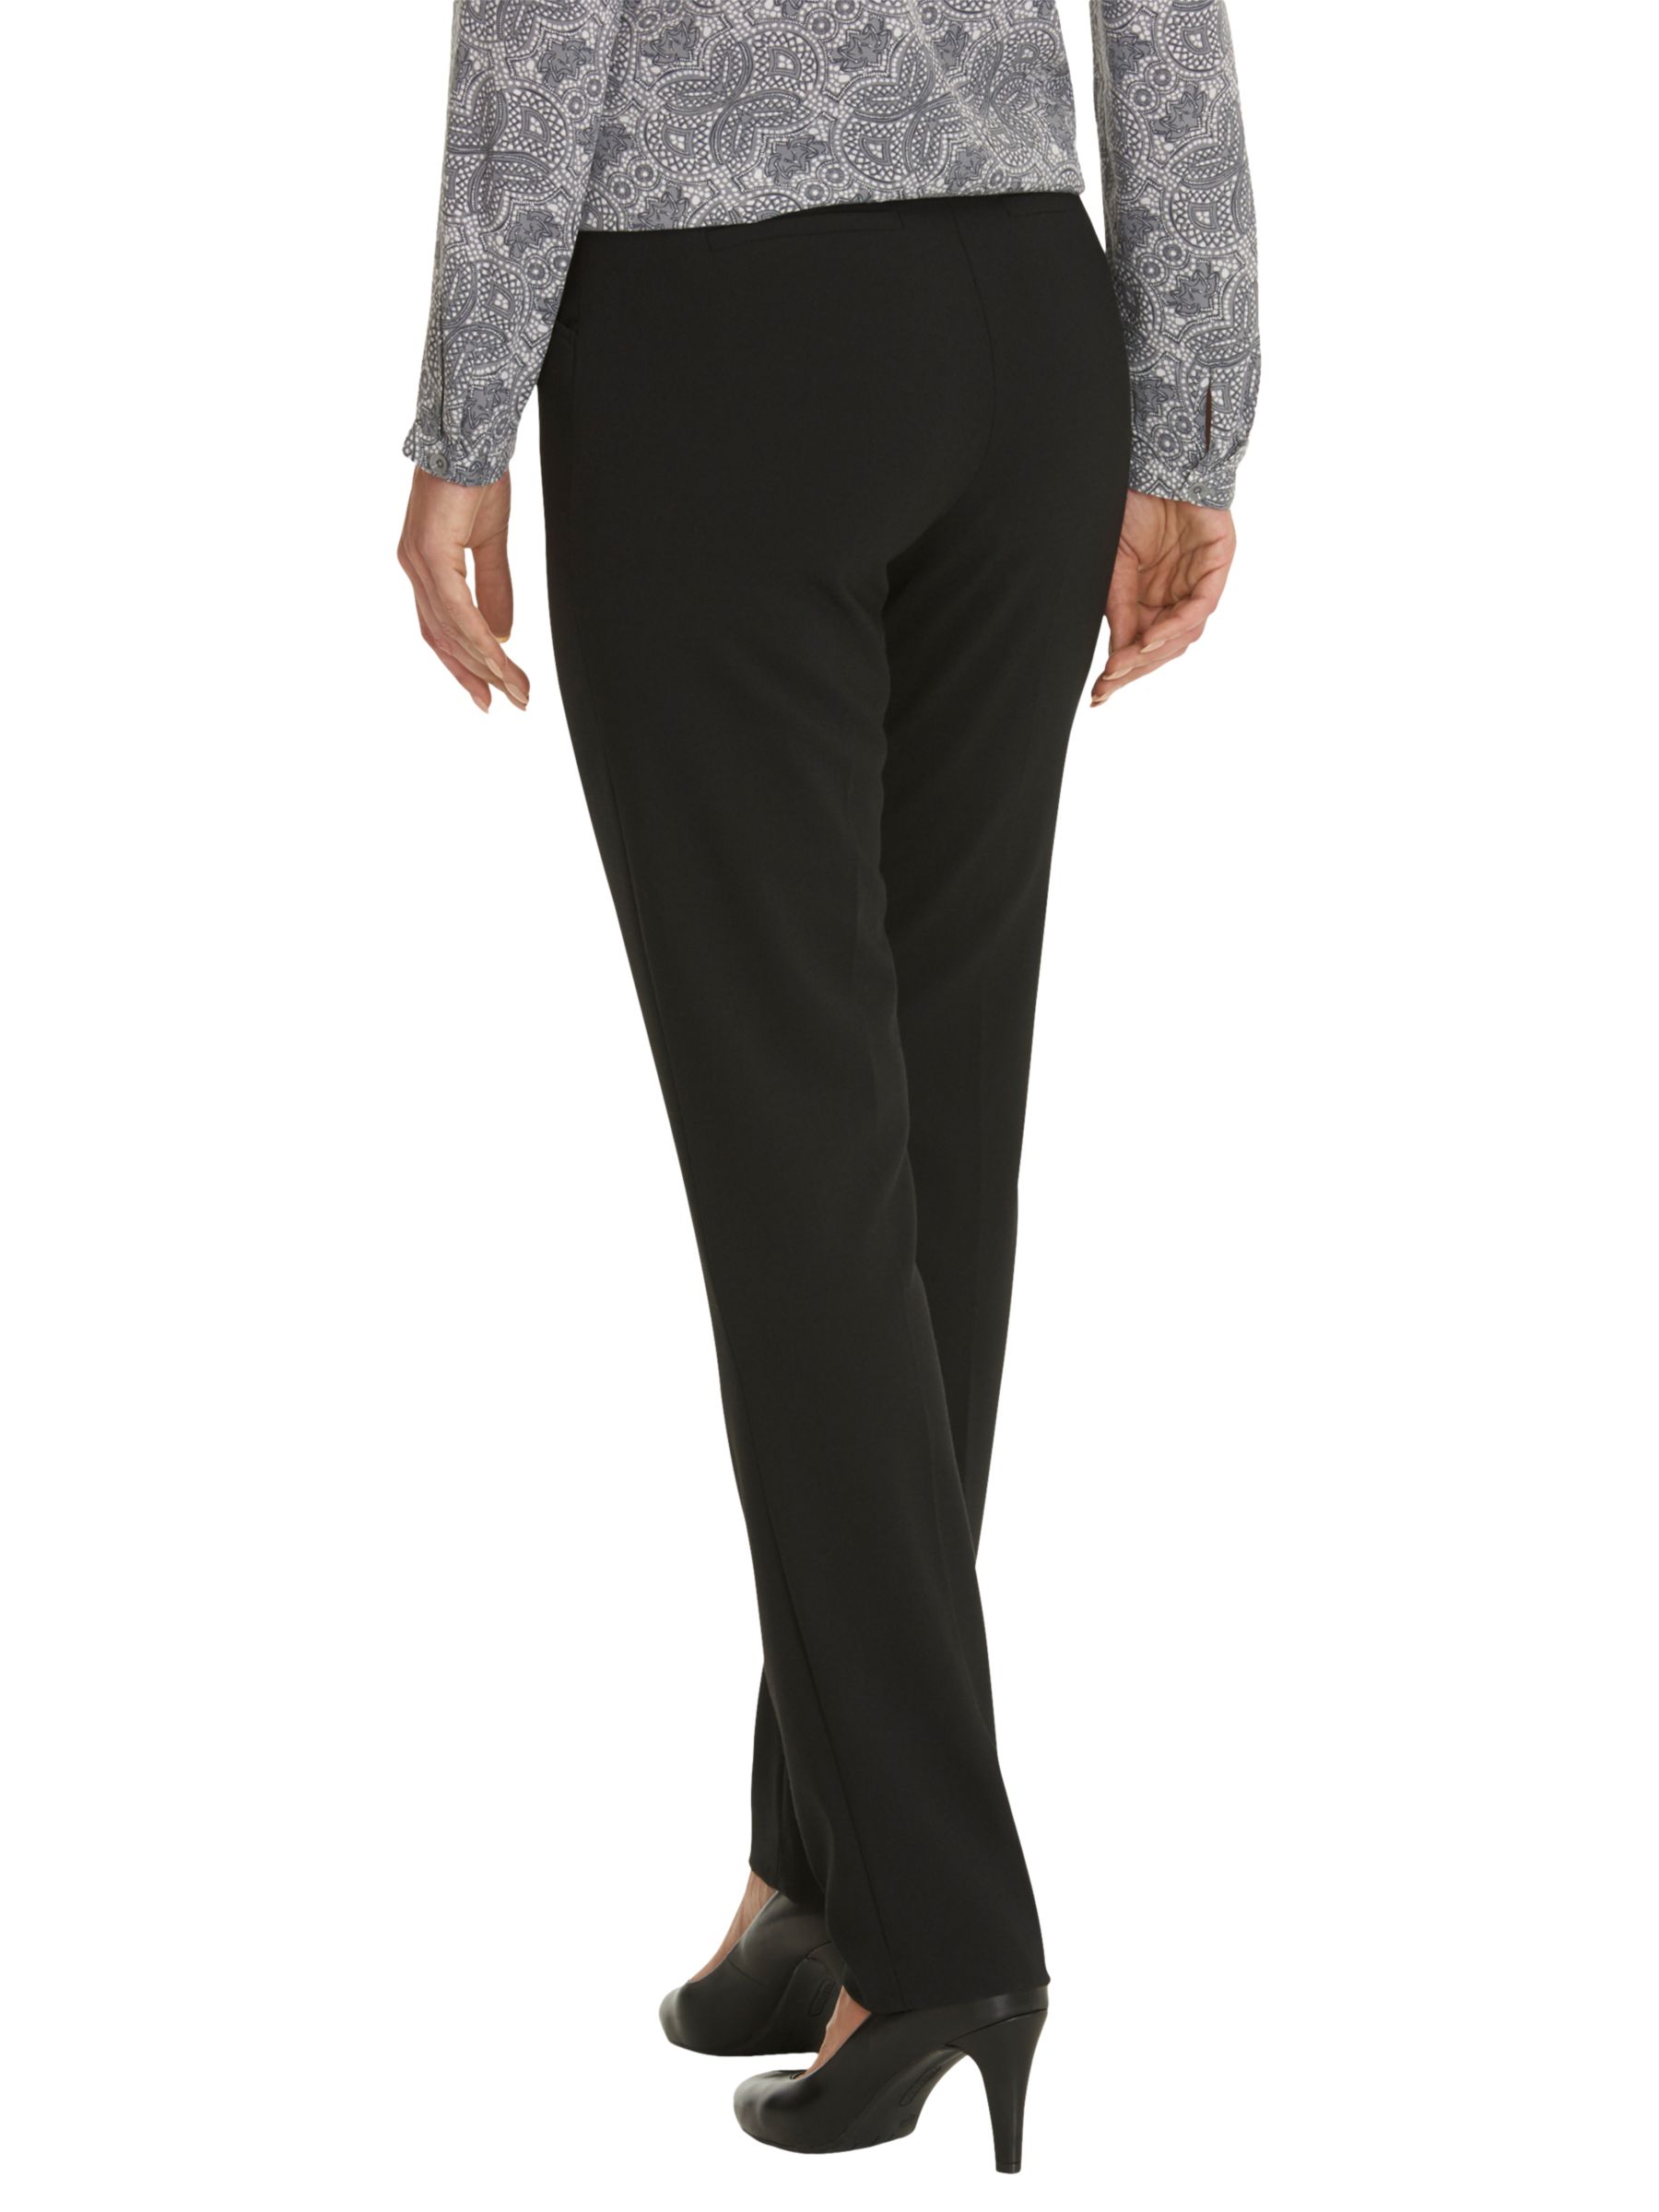 Betty Barclay Straight Leg Tailored Trousers, Black at John Lewis ...